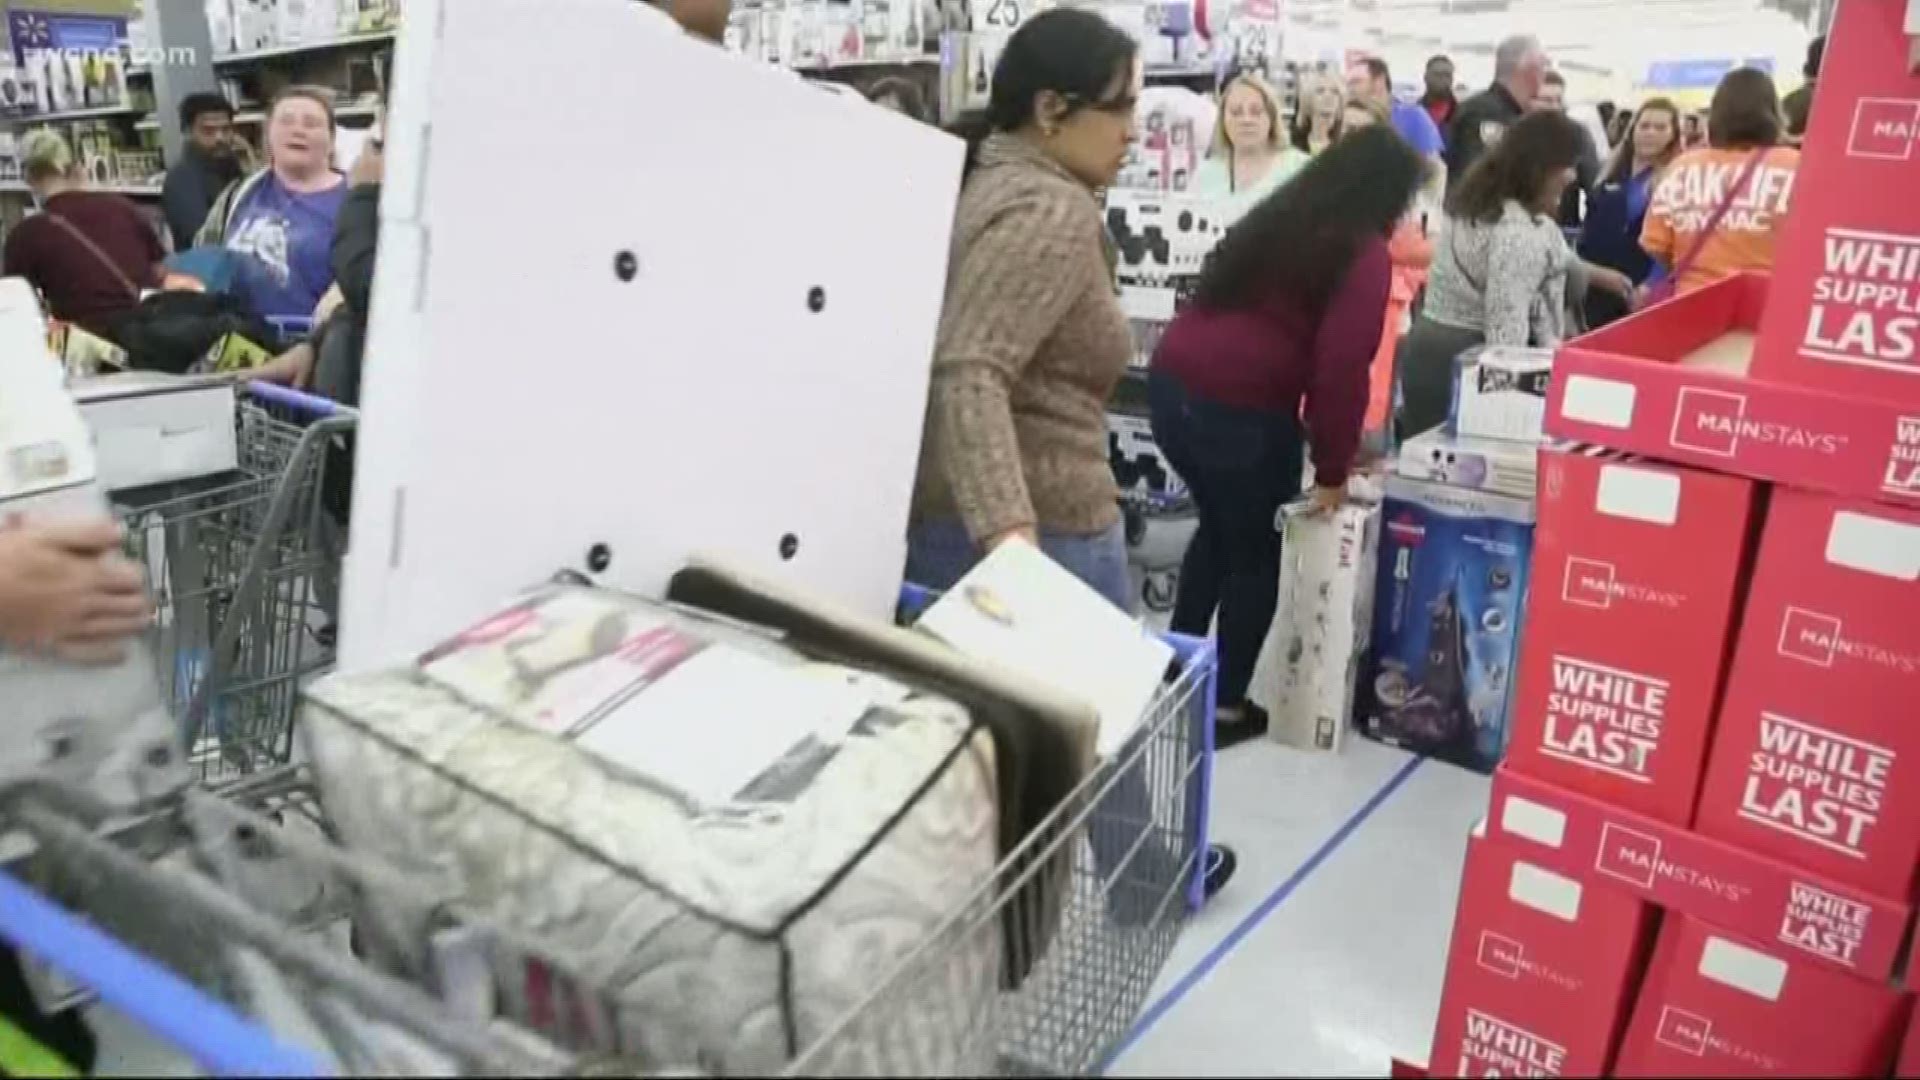 Before you deck the halls, you might want to check the price. According to a new survey, the average person checks four places before buying a gift.